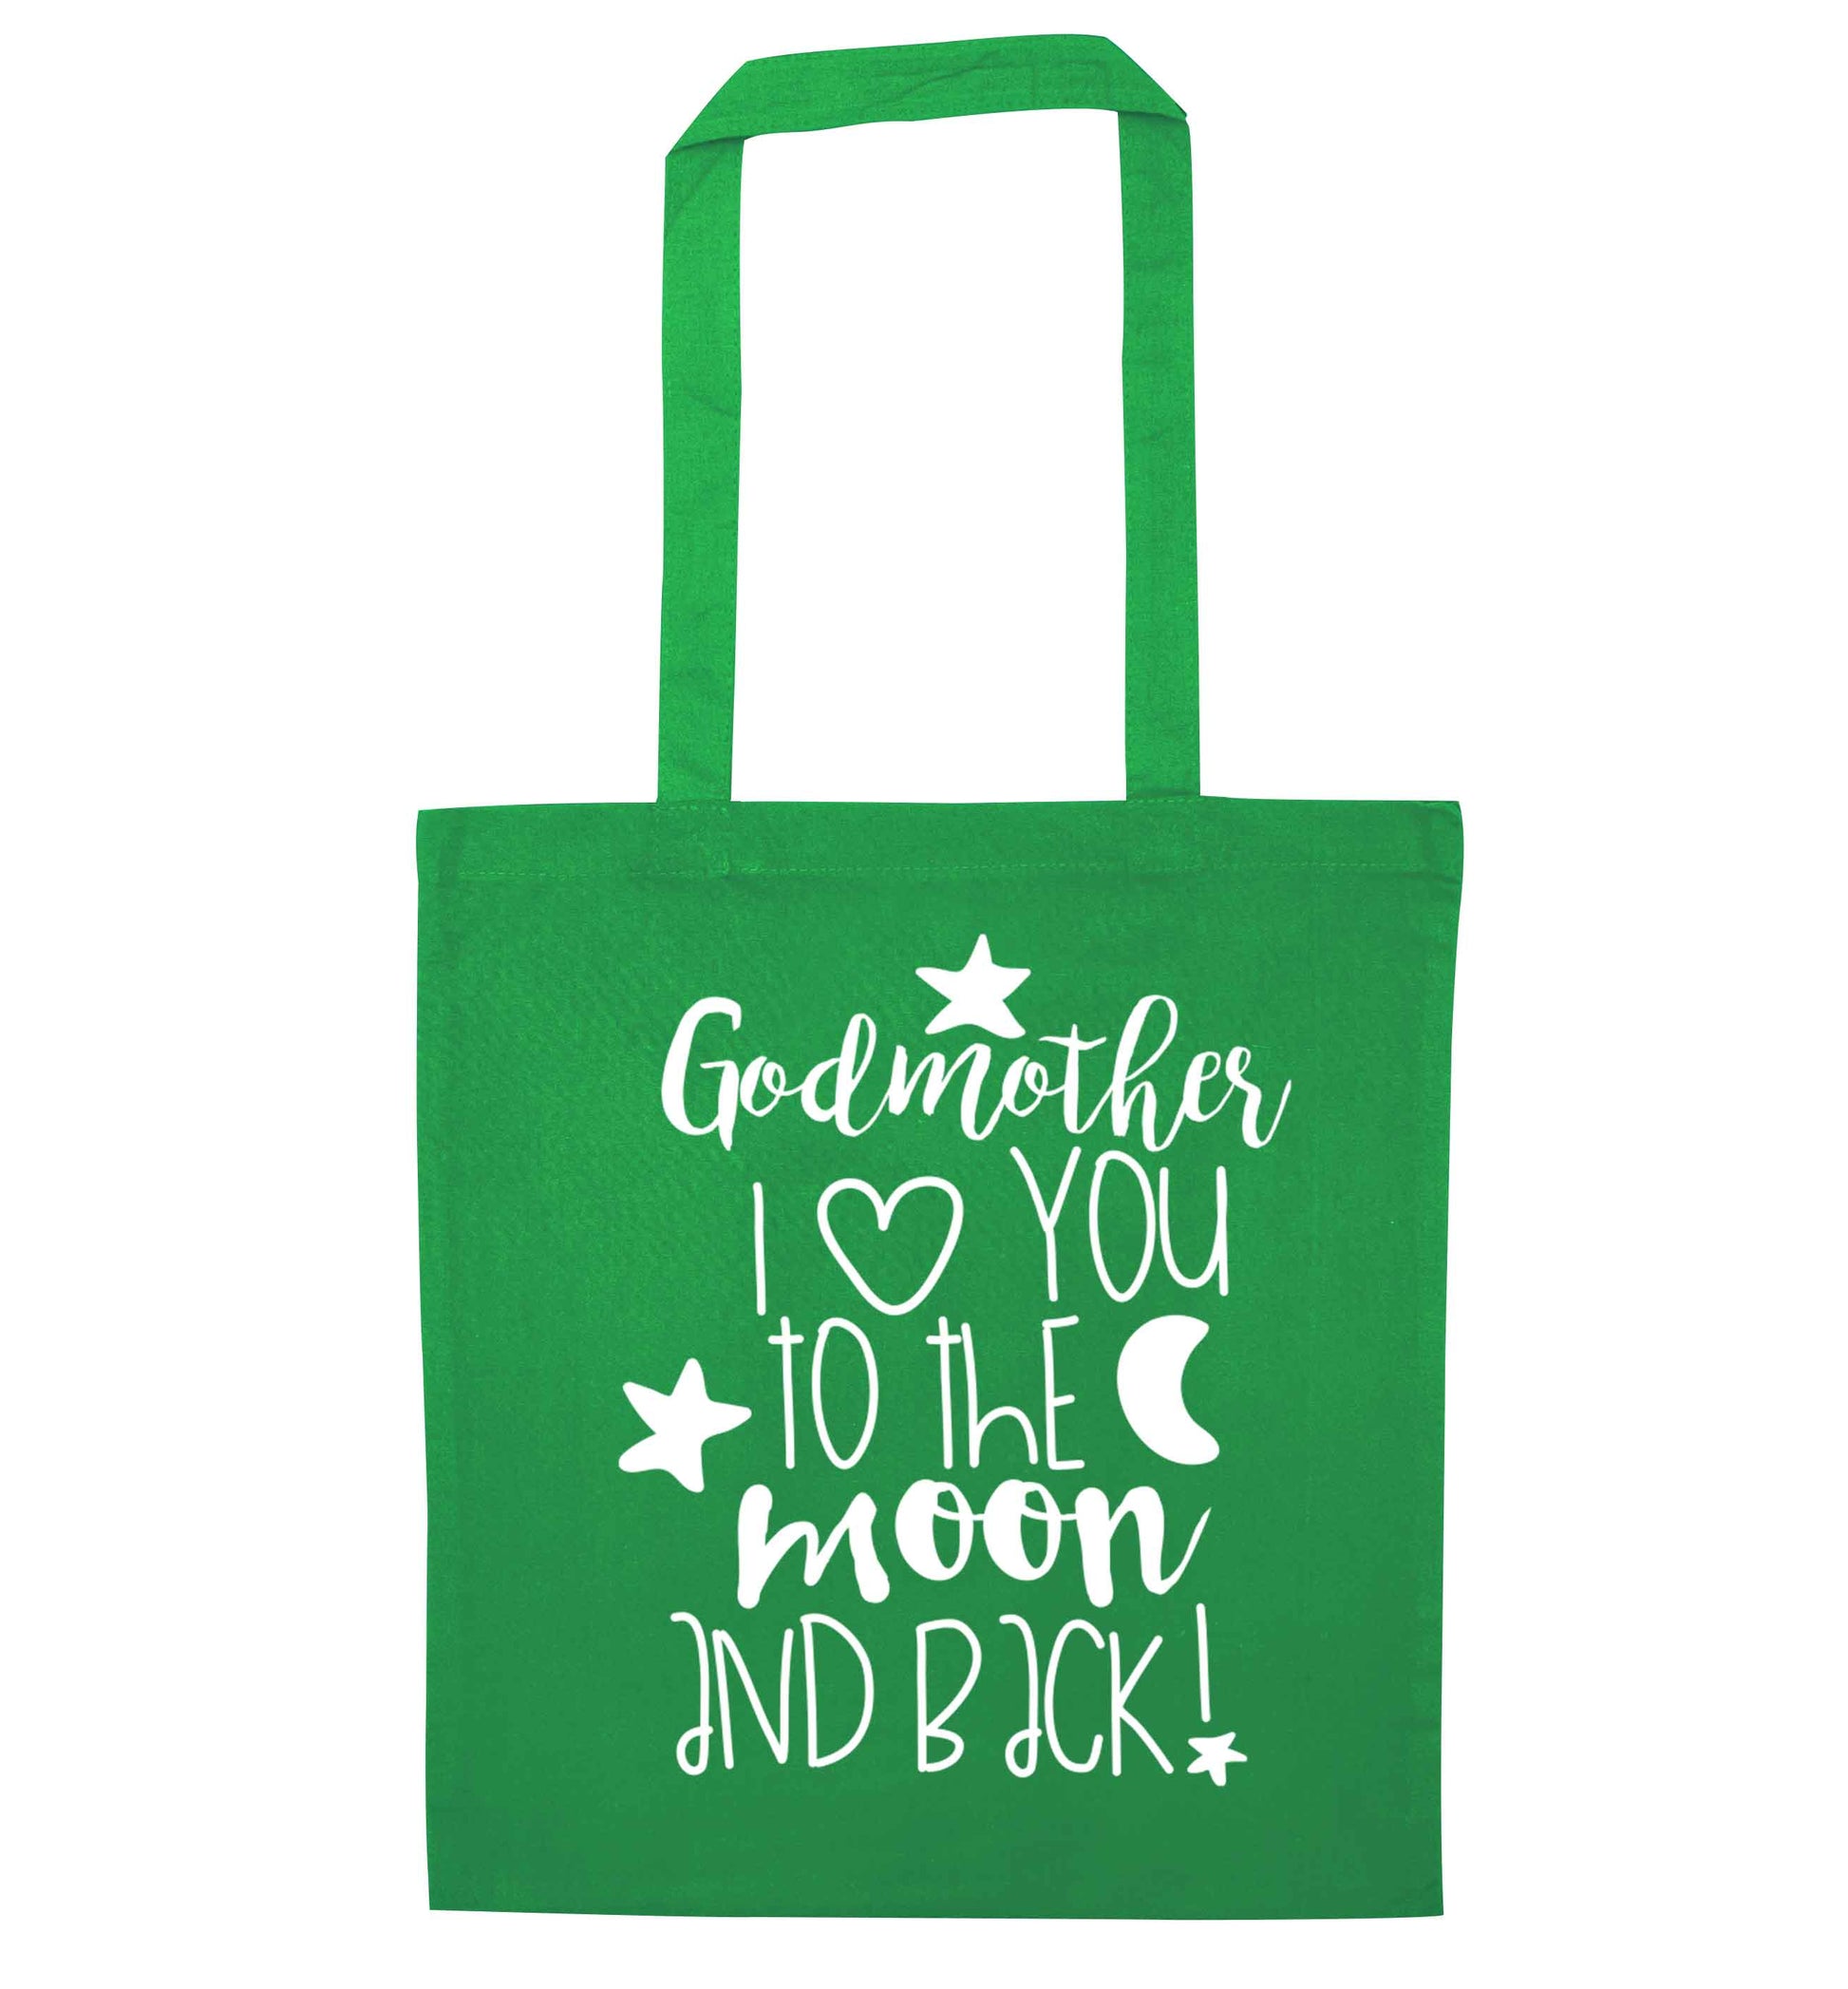 Godmother I love you to the moon and back green tote bag